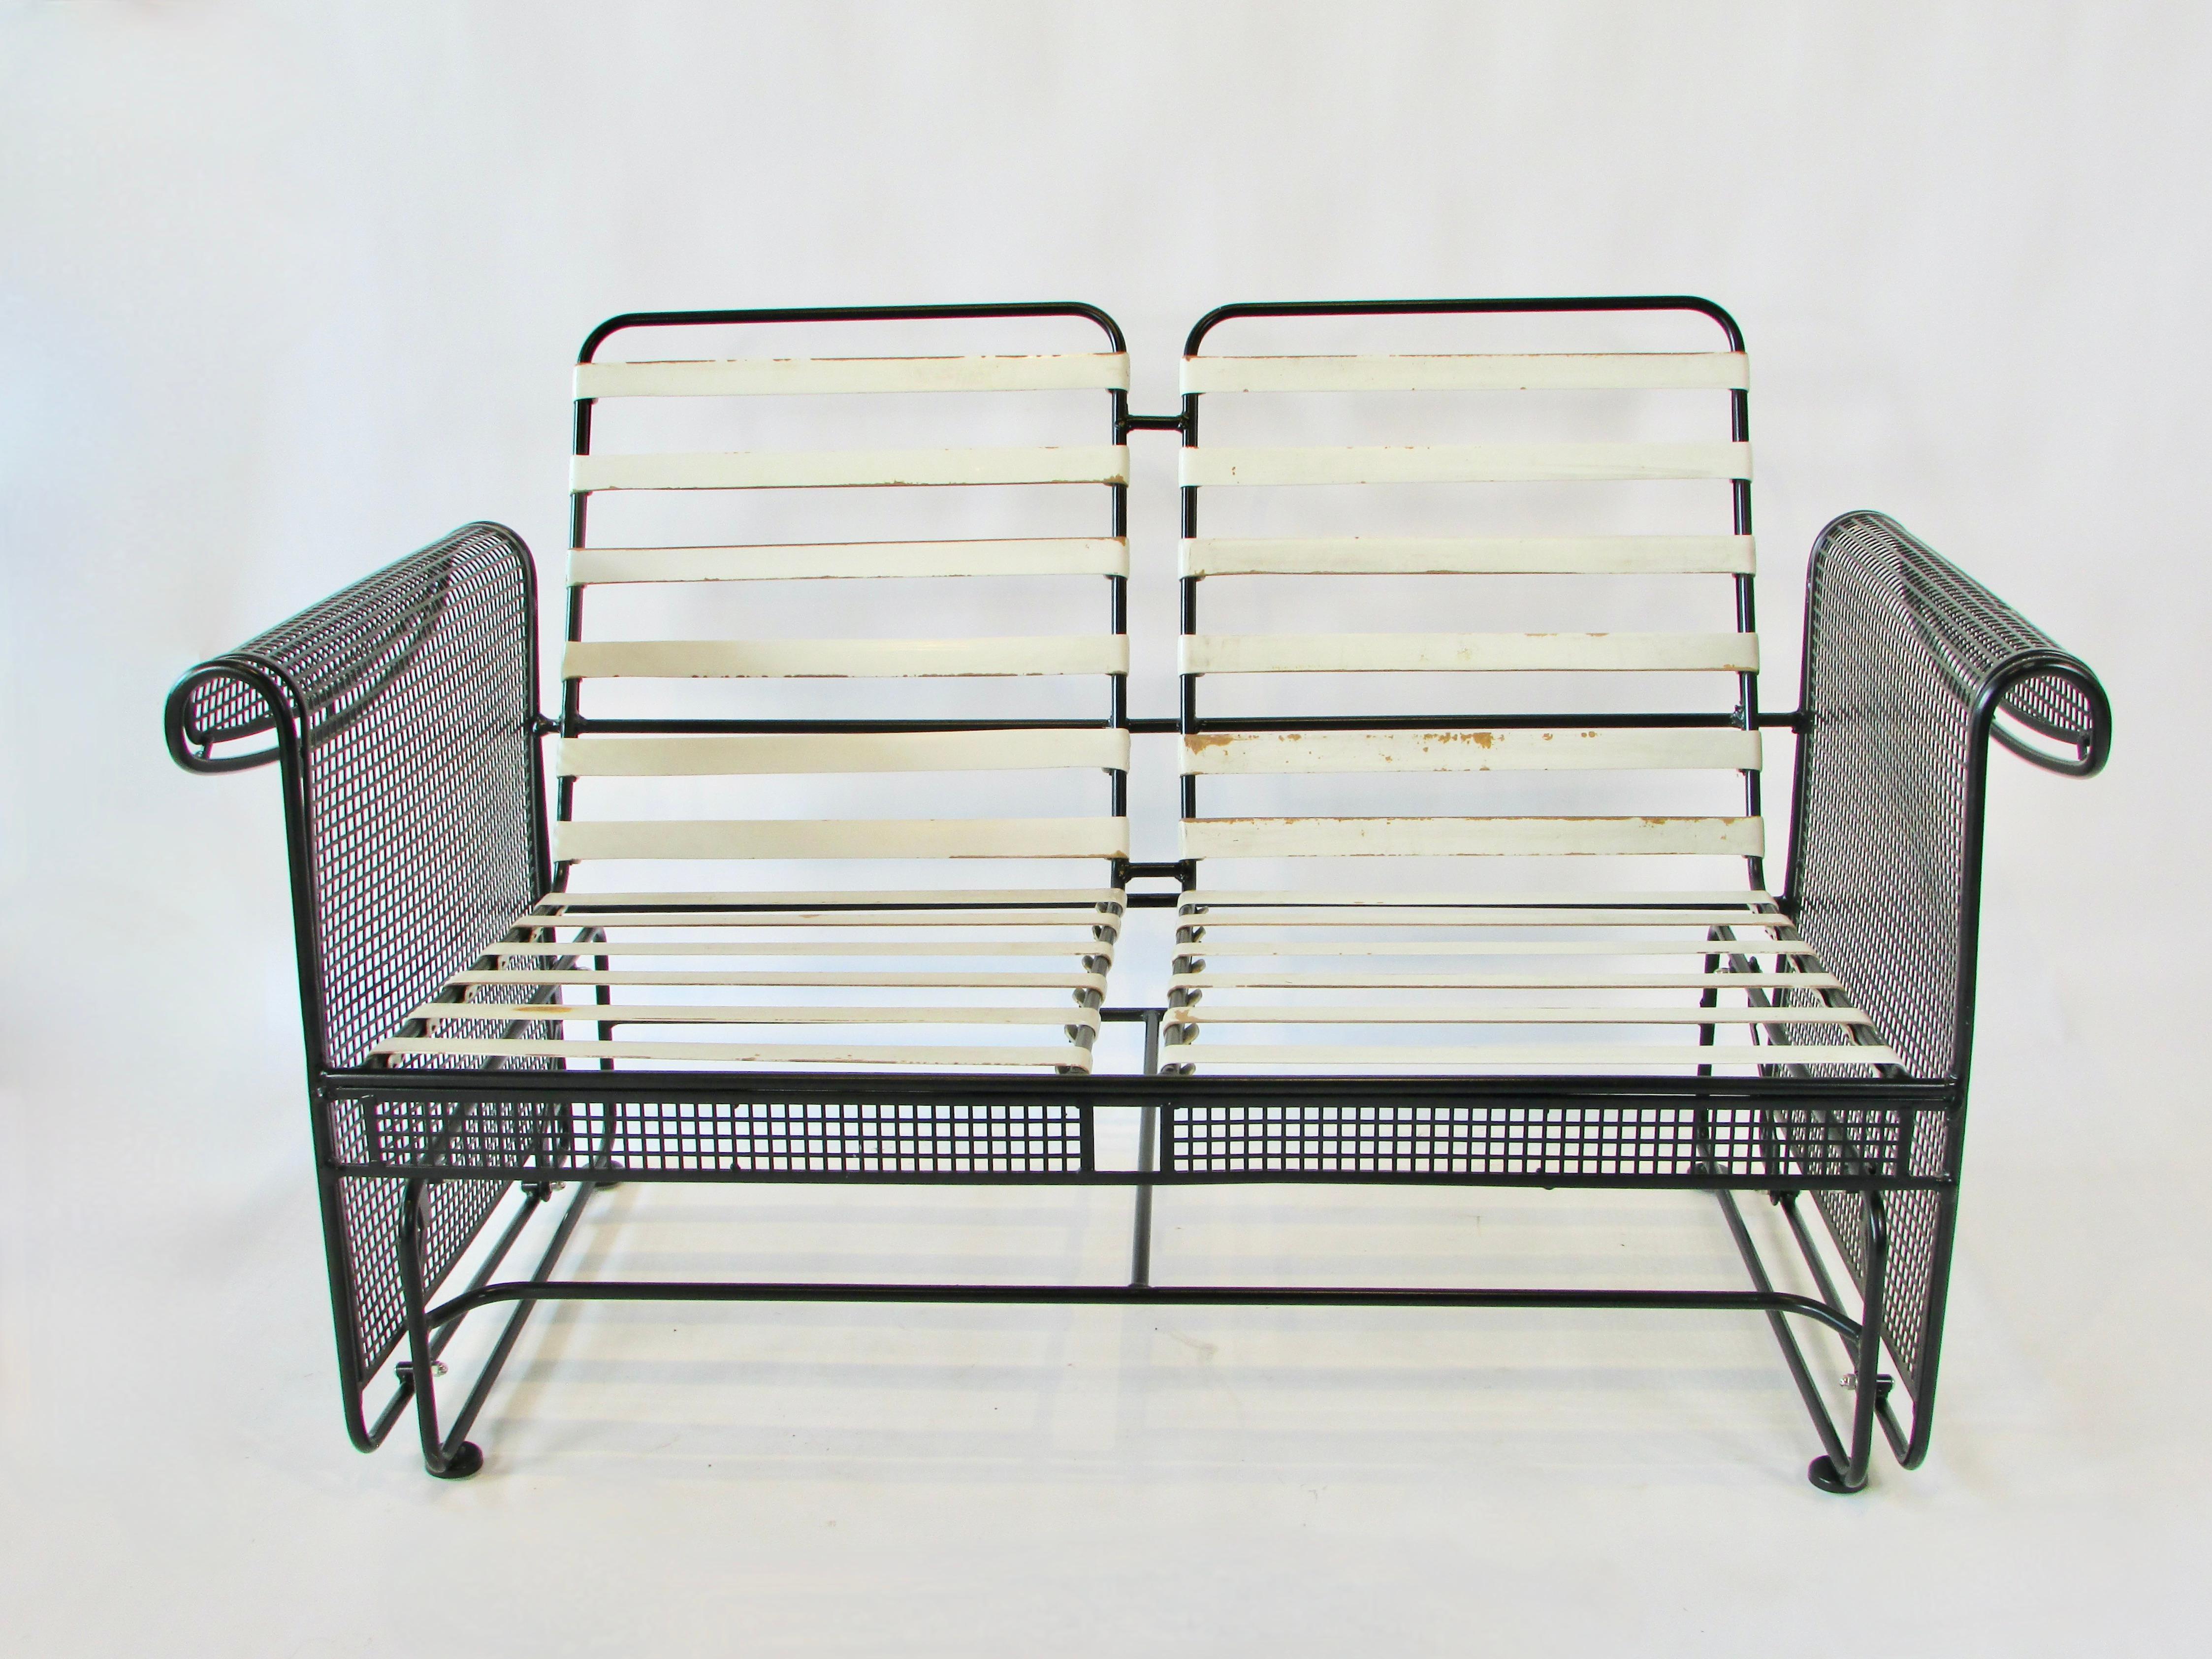 Woodard two piece  porch glider .  Recently powder coated in matte black finish . New glides added to feet . Wrought iron seat frame with mesh steel sides mounted to solid wrought iron frame  using four steel straps with ball bearing fittings .